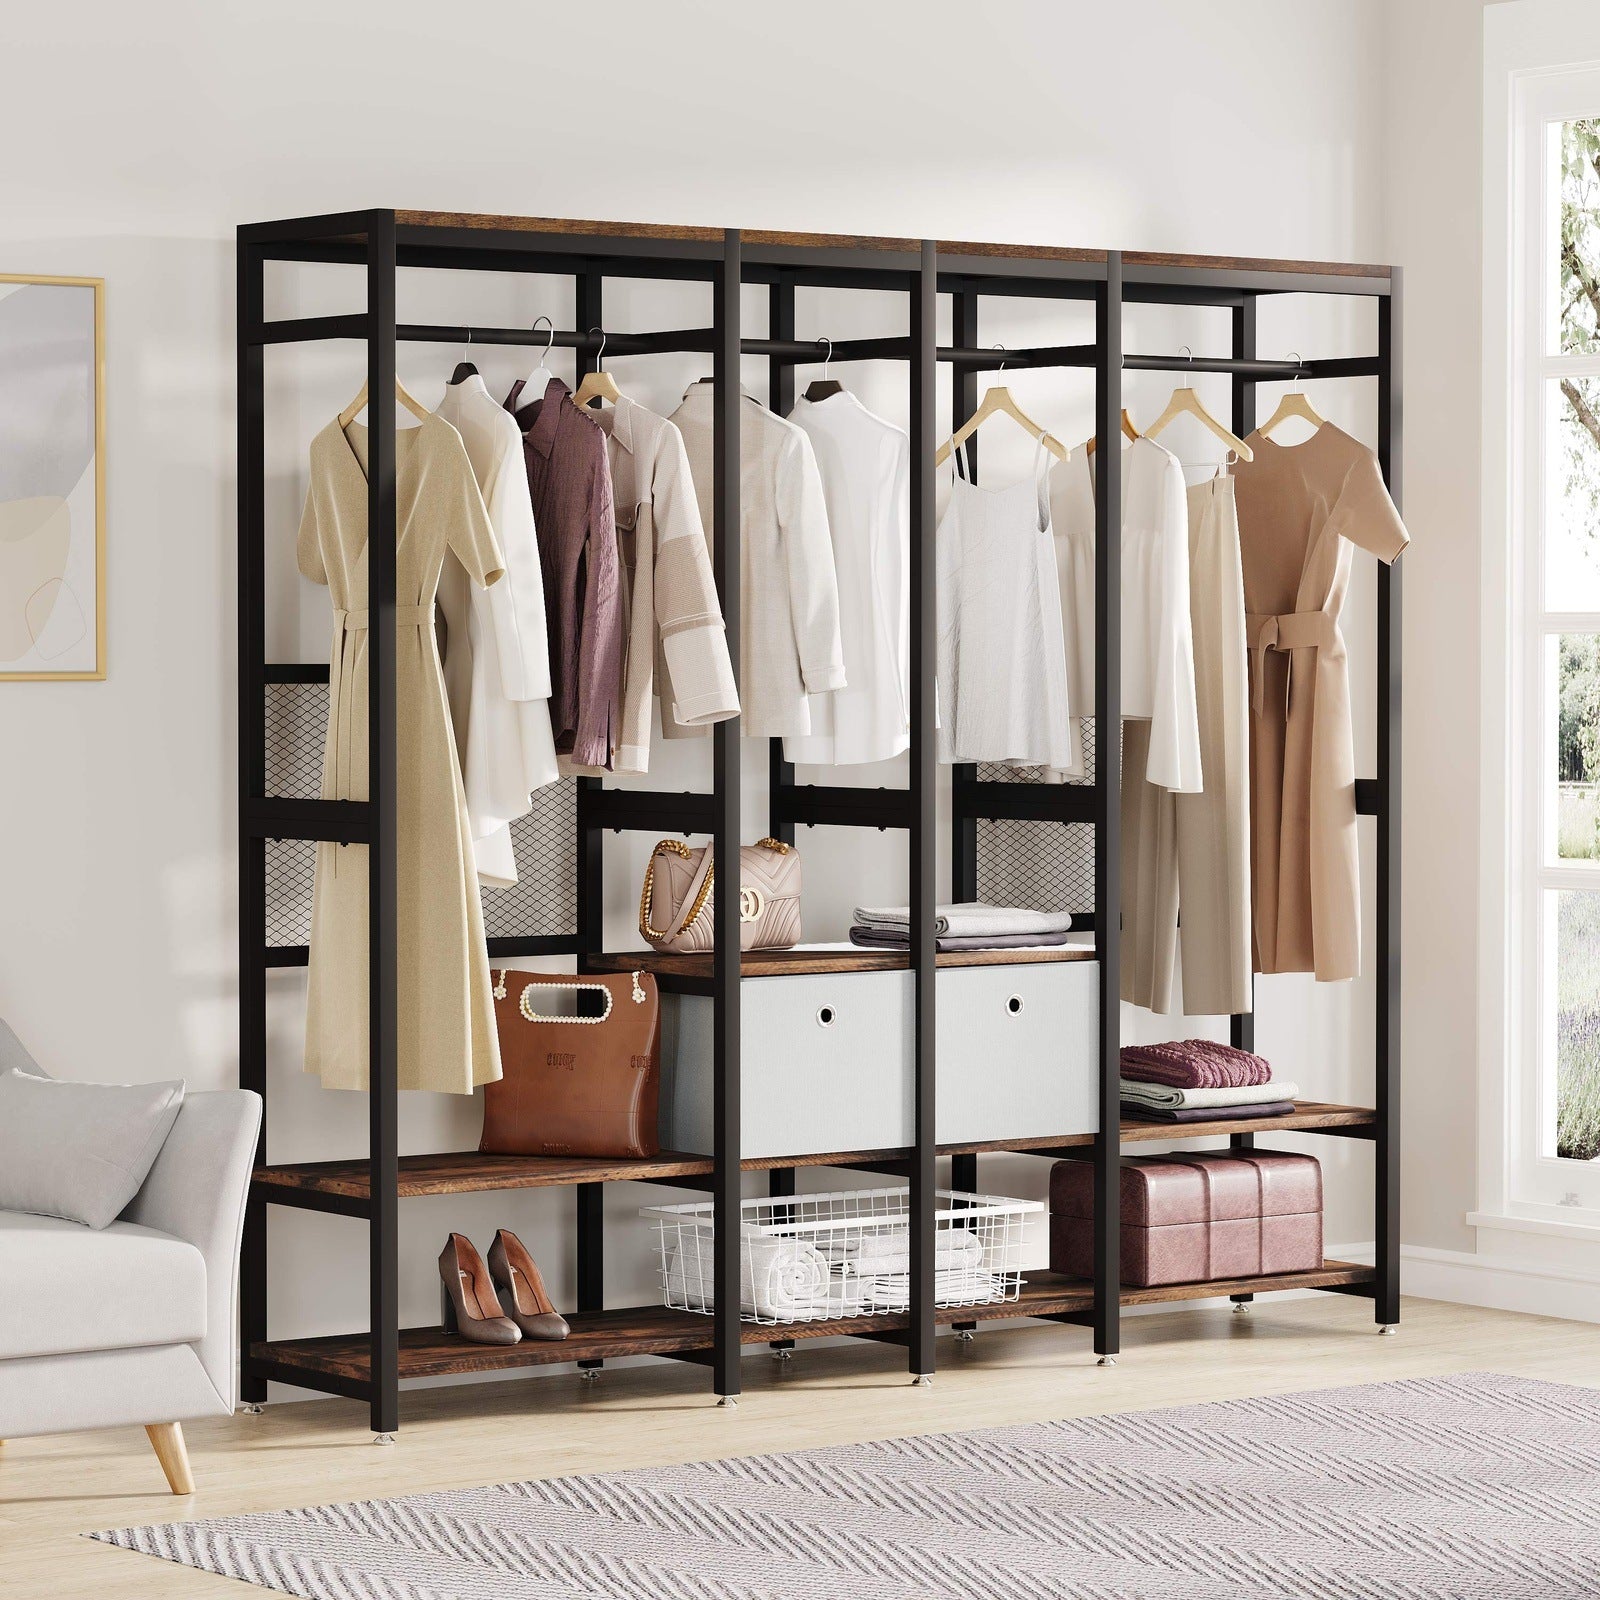 Extra Large Freestanding Closet Organizer with Shelves and Hanging